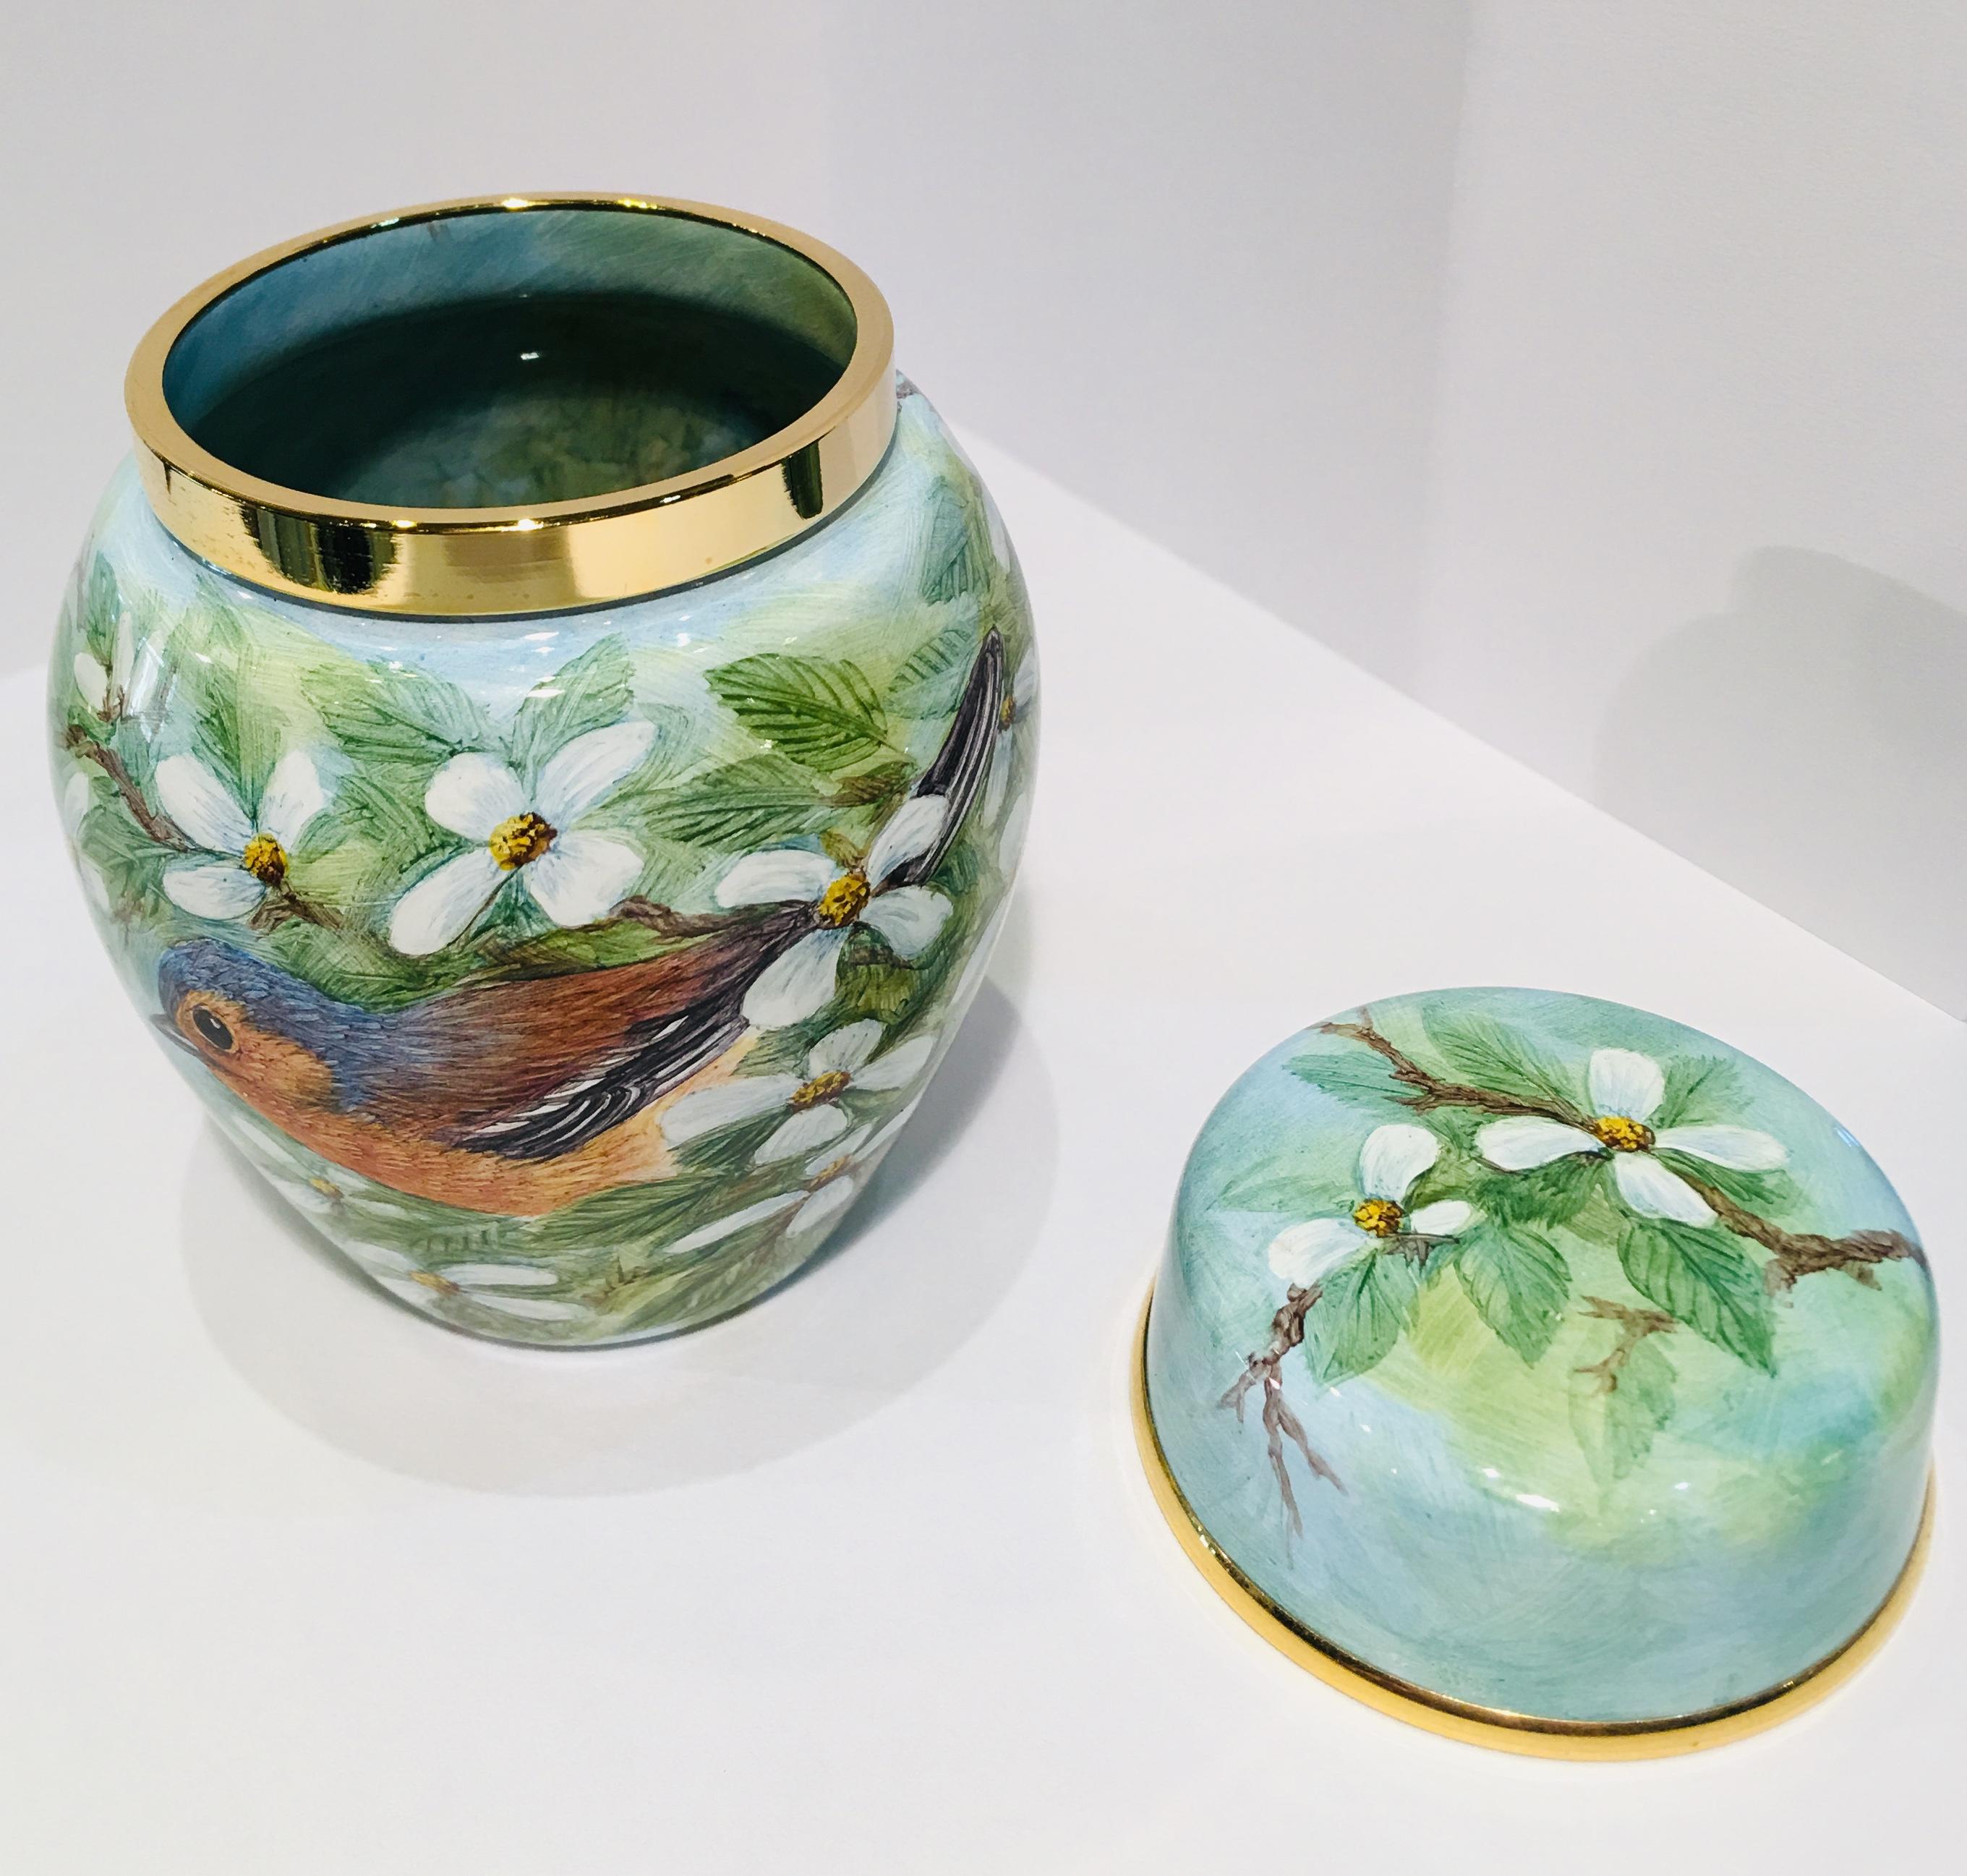 Rare Exquisite Moorcroft Enamel and Gold Limited Edition Miniature Ginger Jar 2